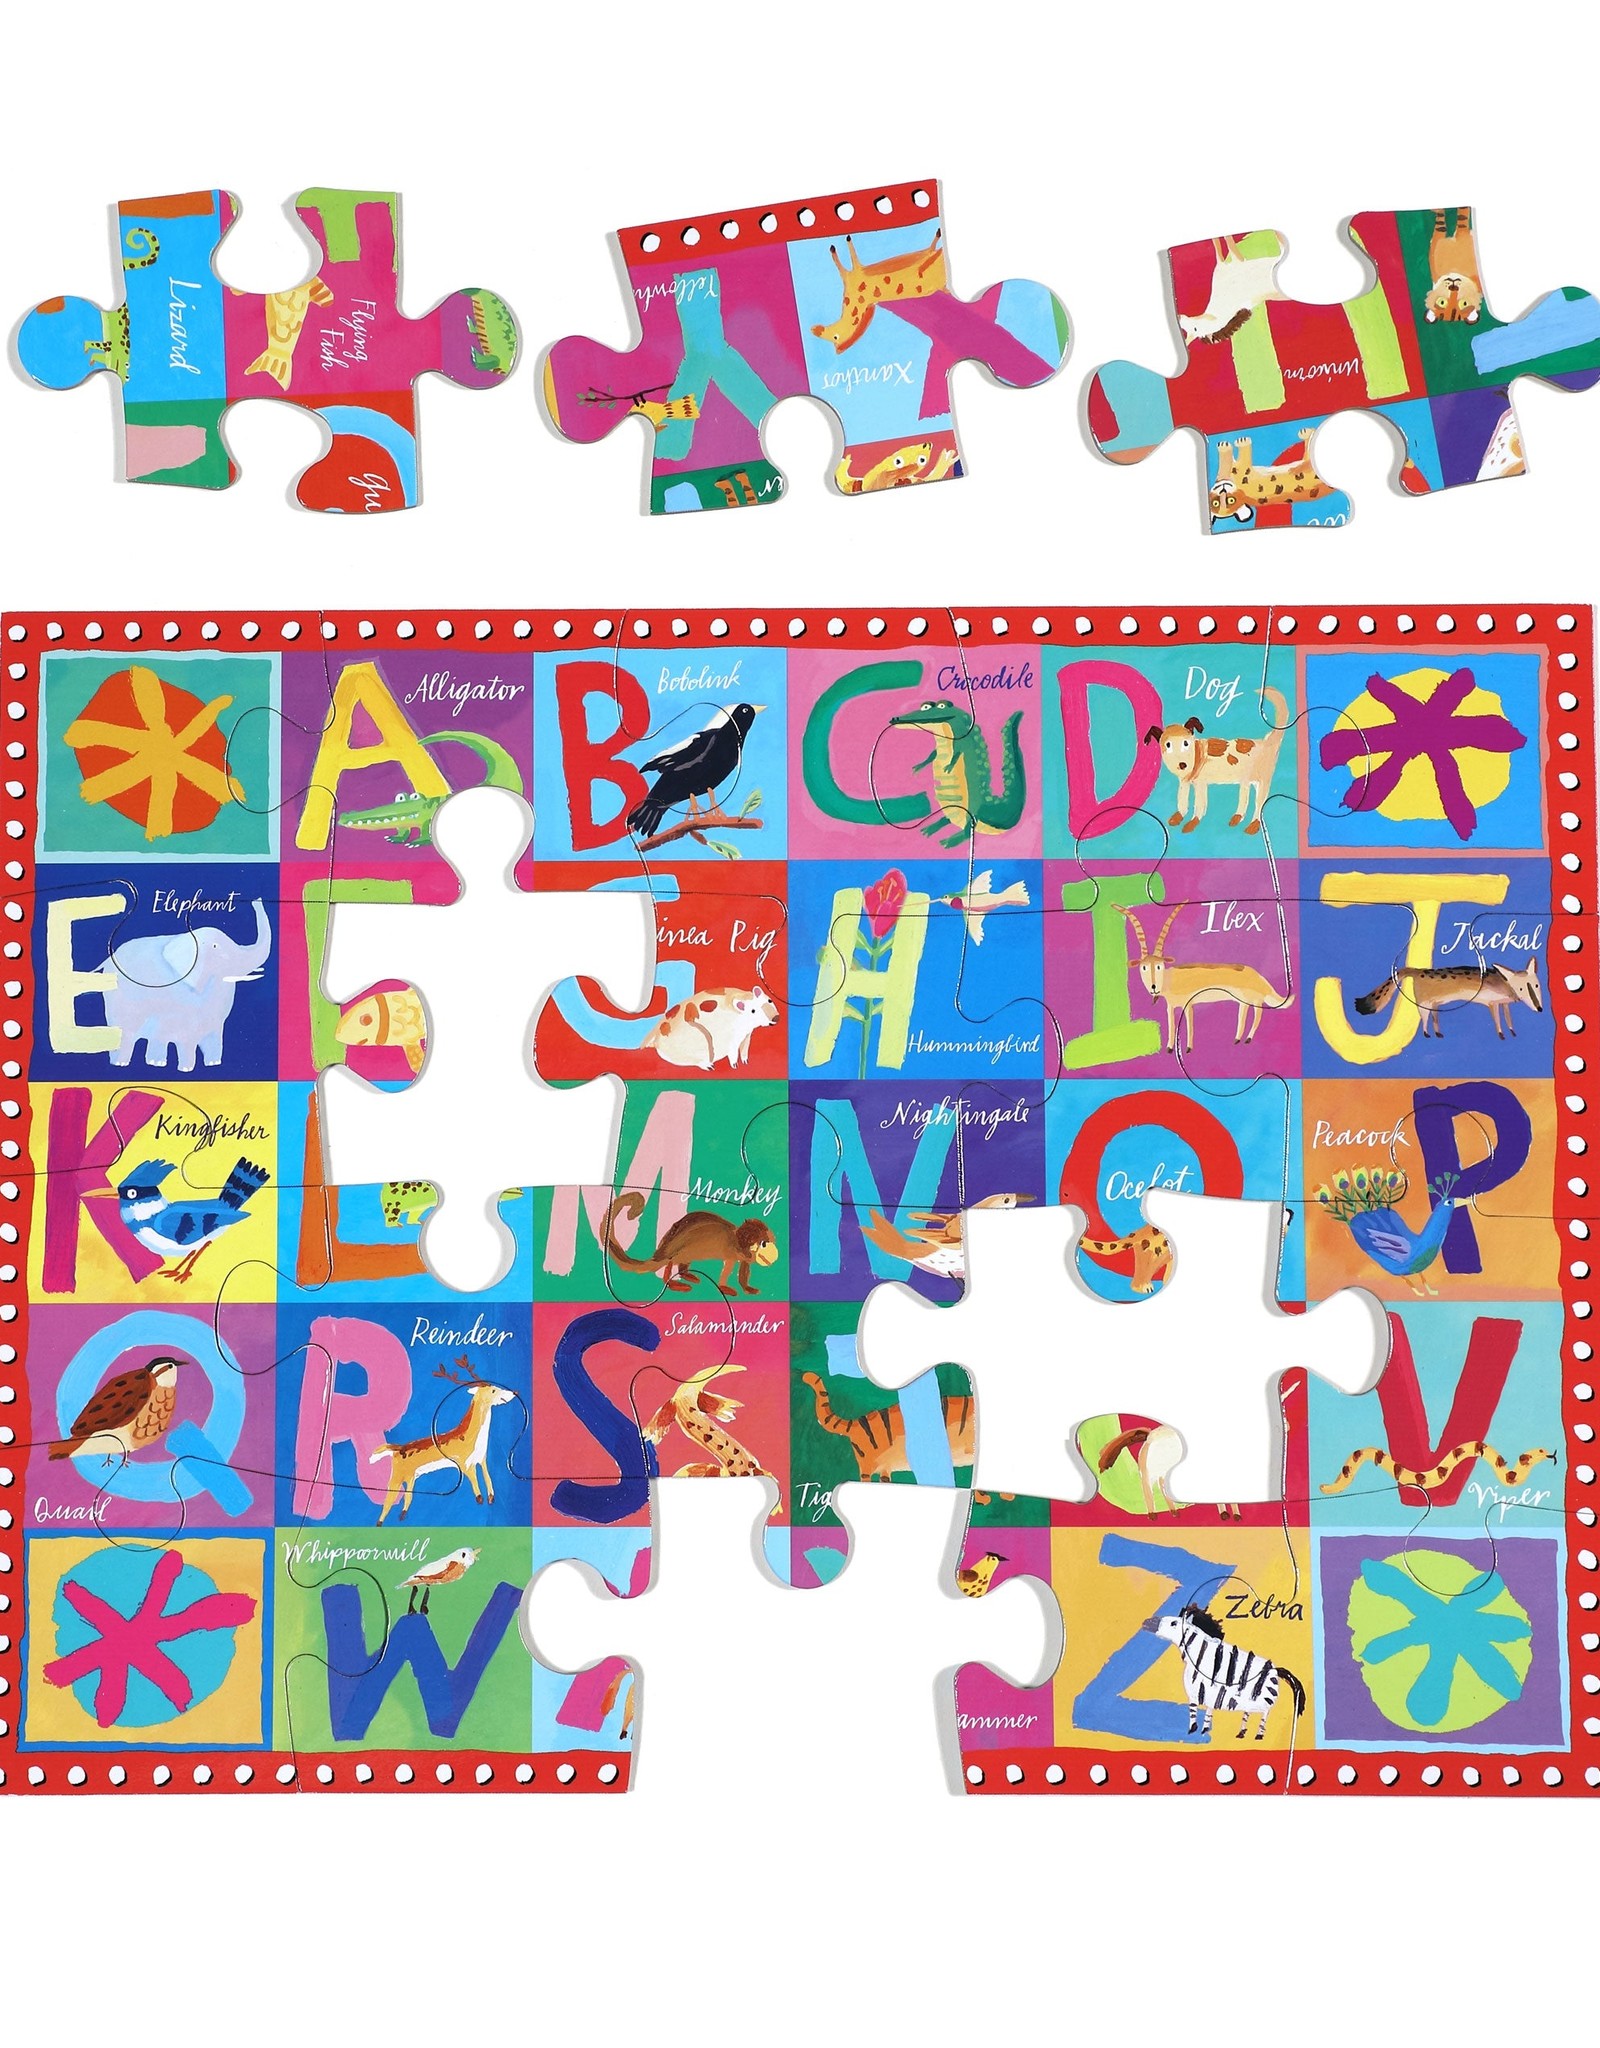 Puzzle Piece Animal Abc Awesome Brooklyn